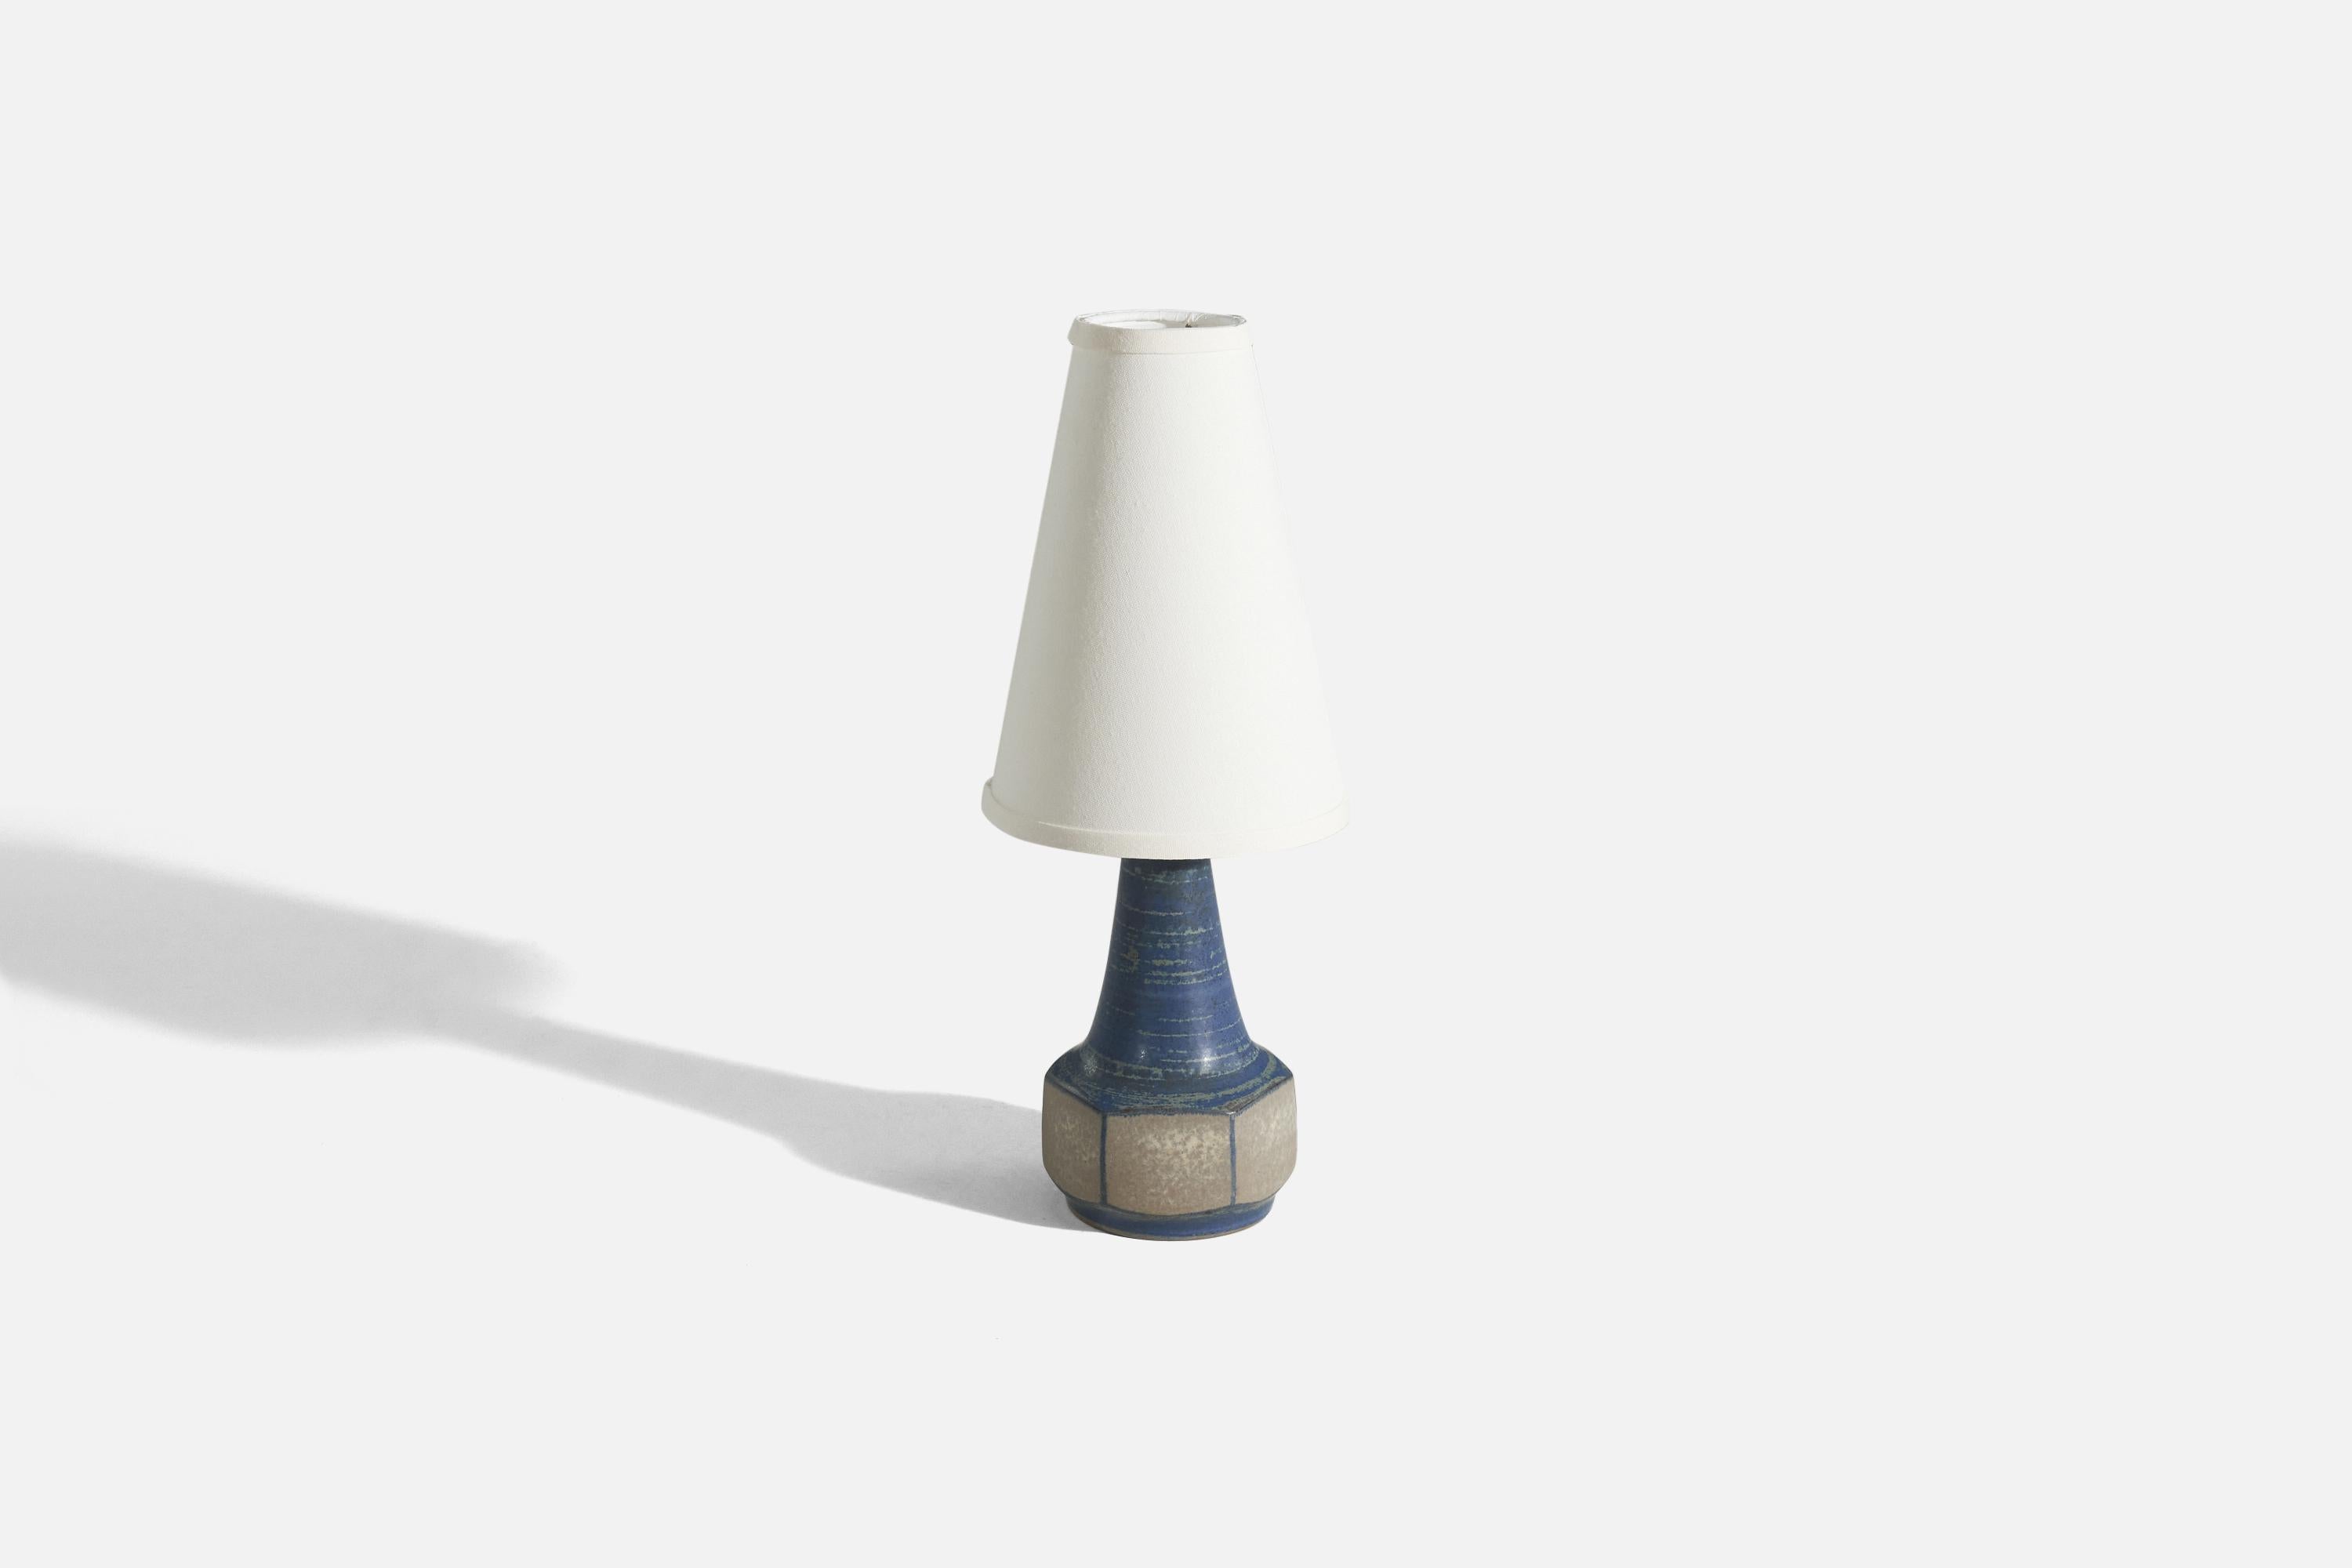 A pair of blue and grey, glazed stoneware table lamps designed by Marianne Starck and produced by Michael Andersen Keramik, Denmark, 1960s. 

Sold without lampshades. 
Dimensions of lamp (inches) : 12.25 x 5.24 x 4.9 (height x width x